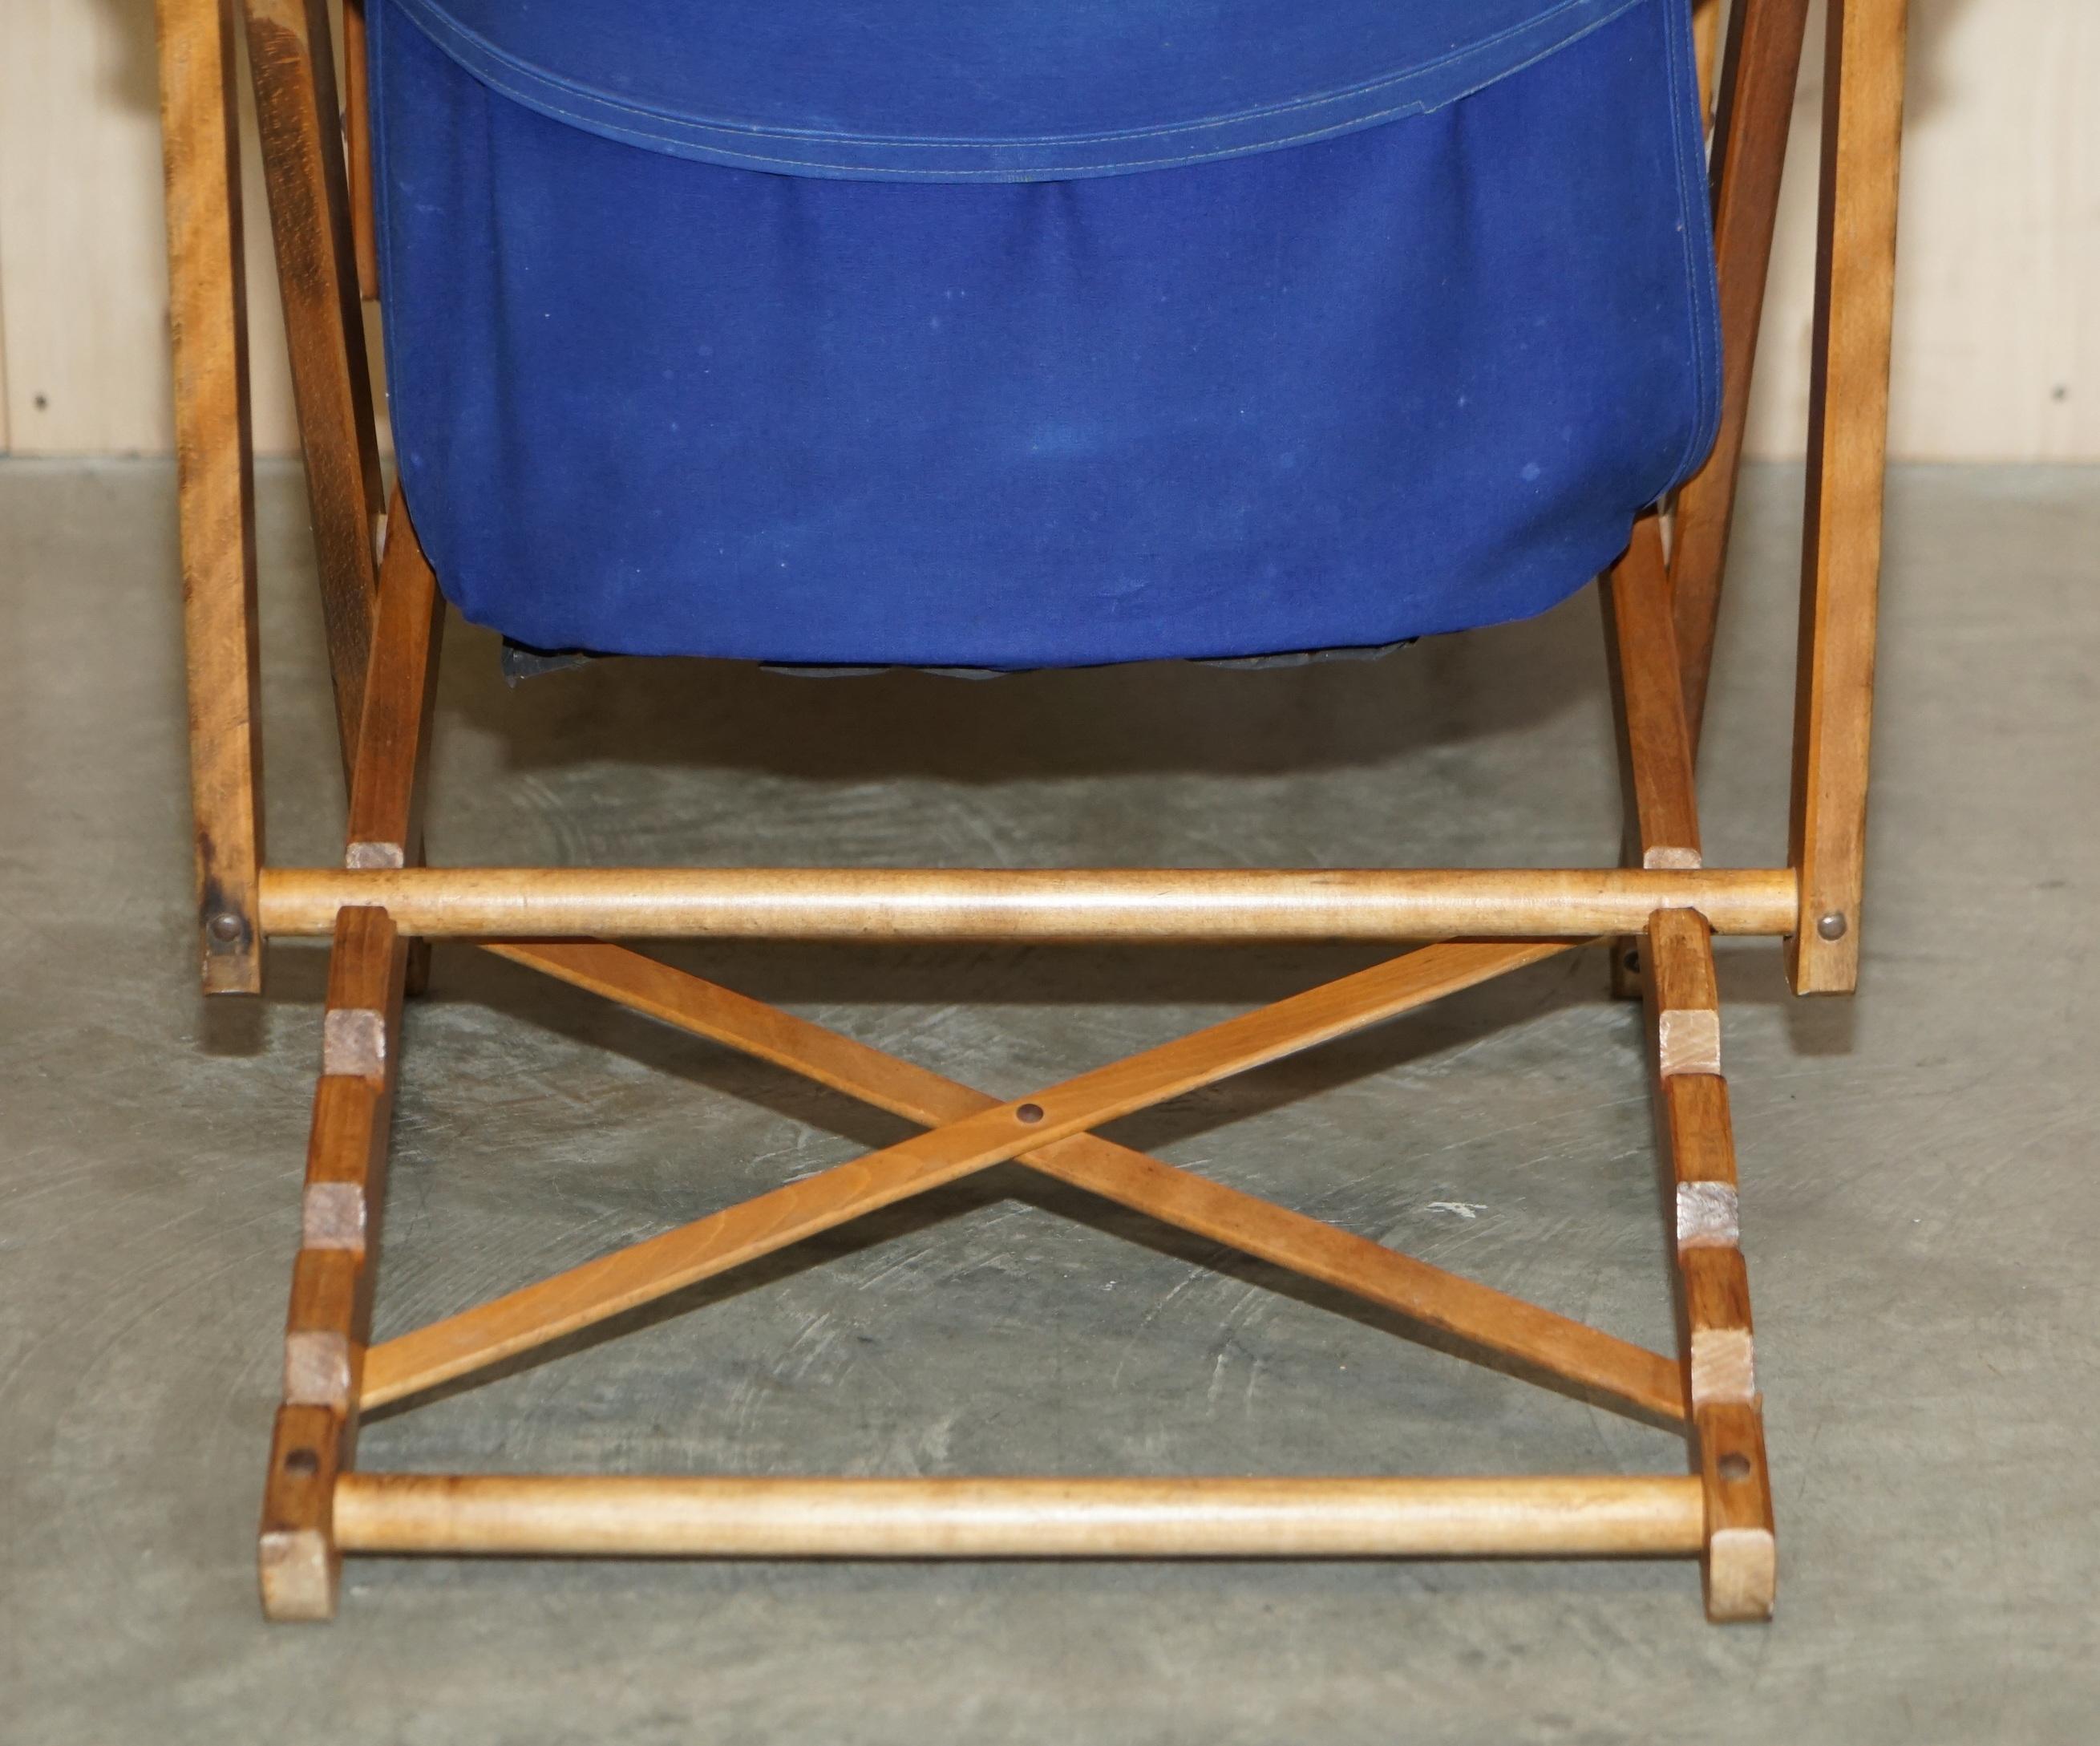 Early 20th Century Pair of Antique circa 1900 Haxyes Steamer Deck Chairs Canopy Top & Footrests For Sale